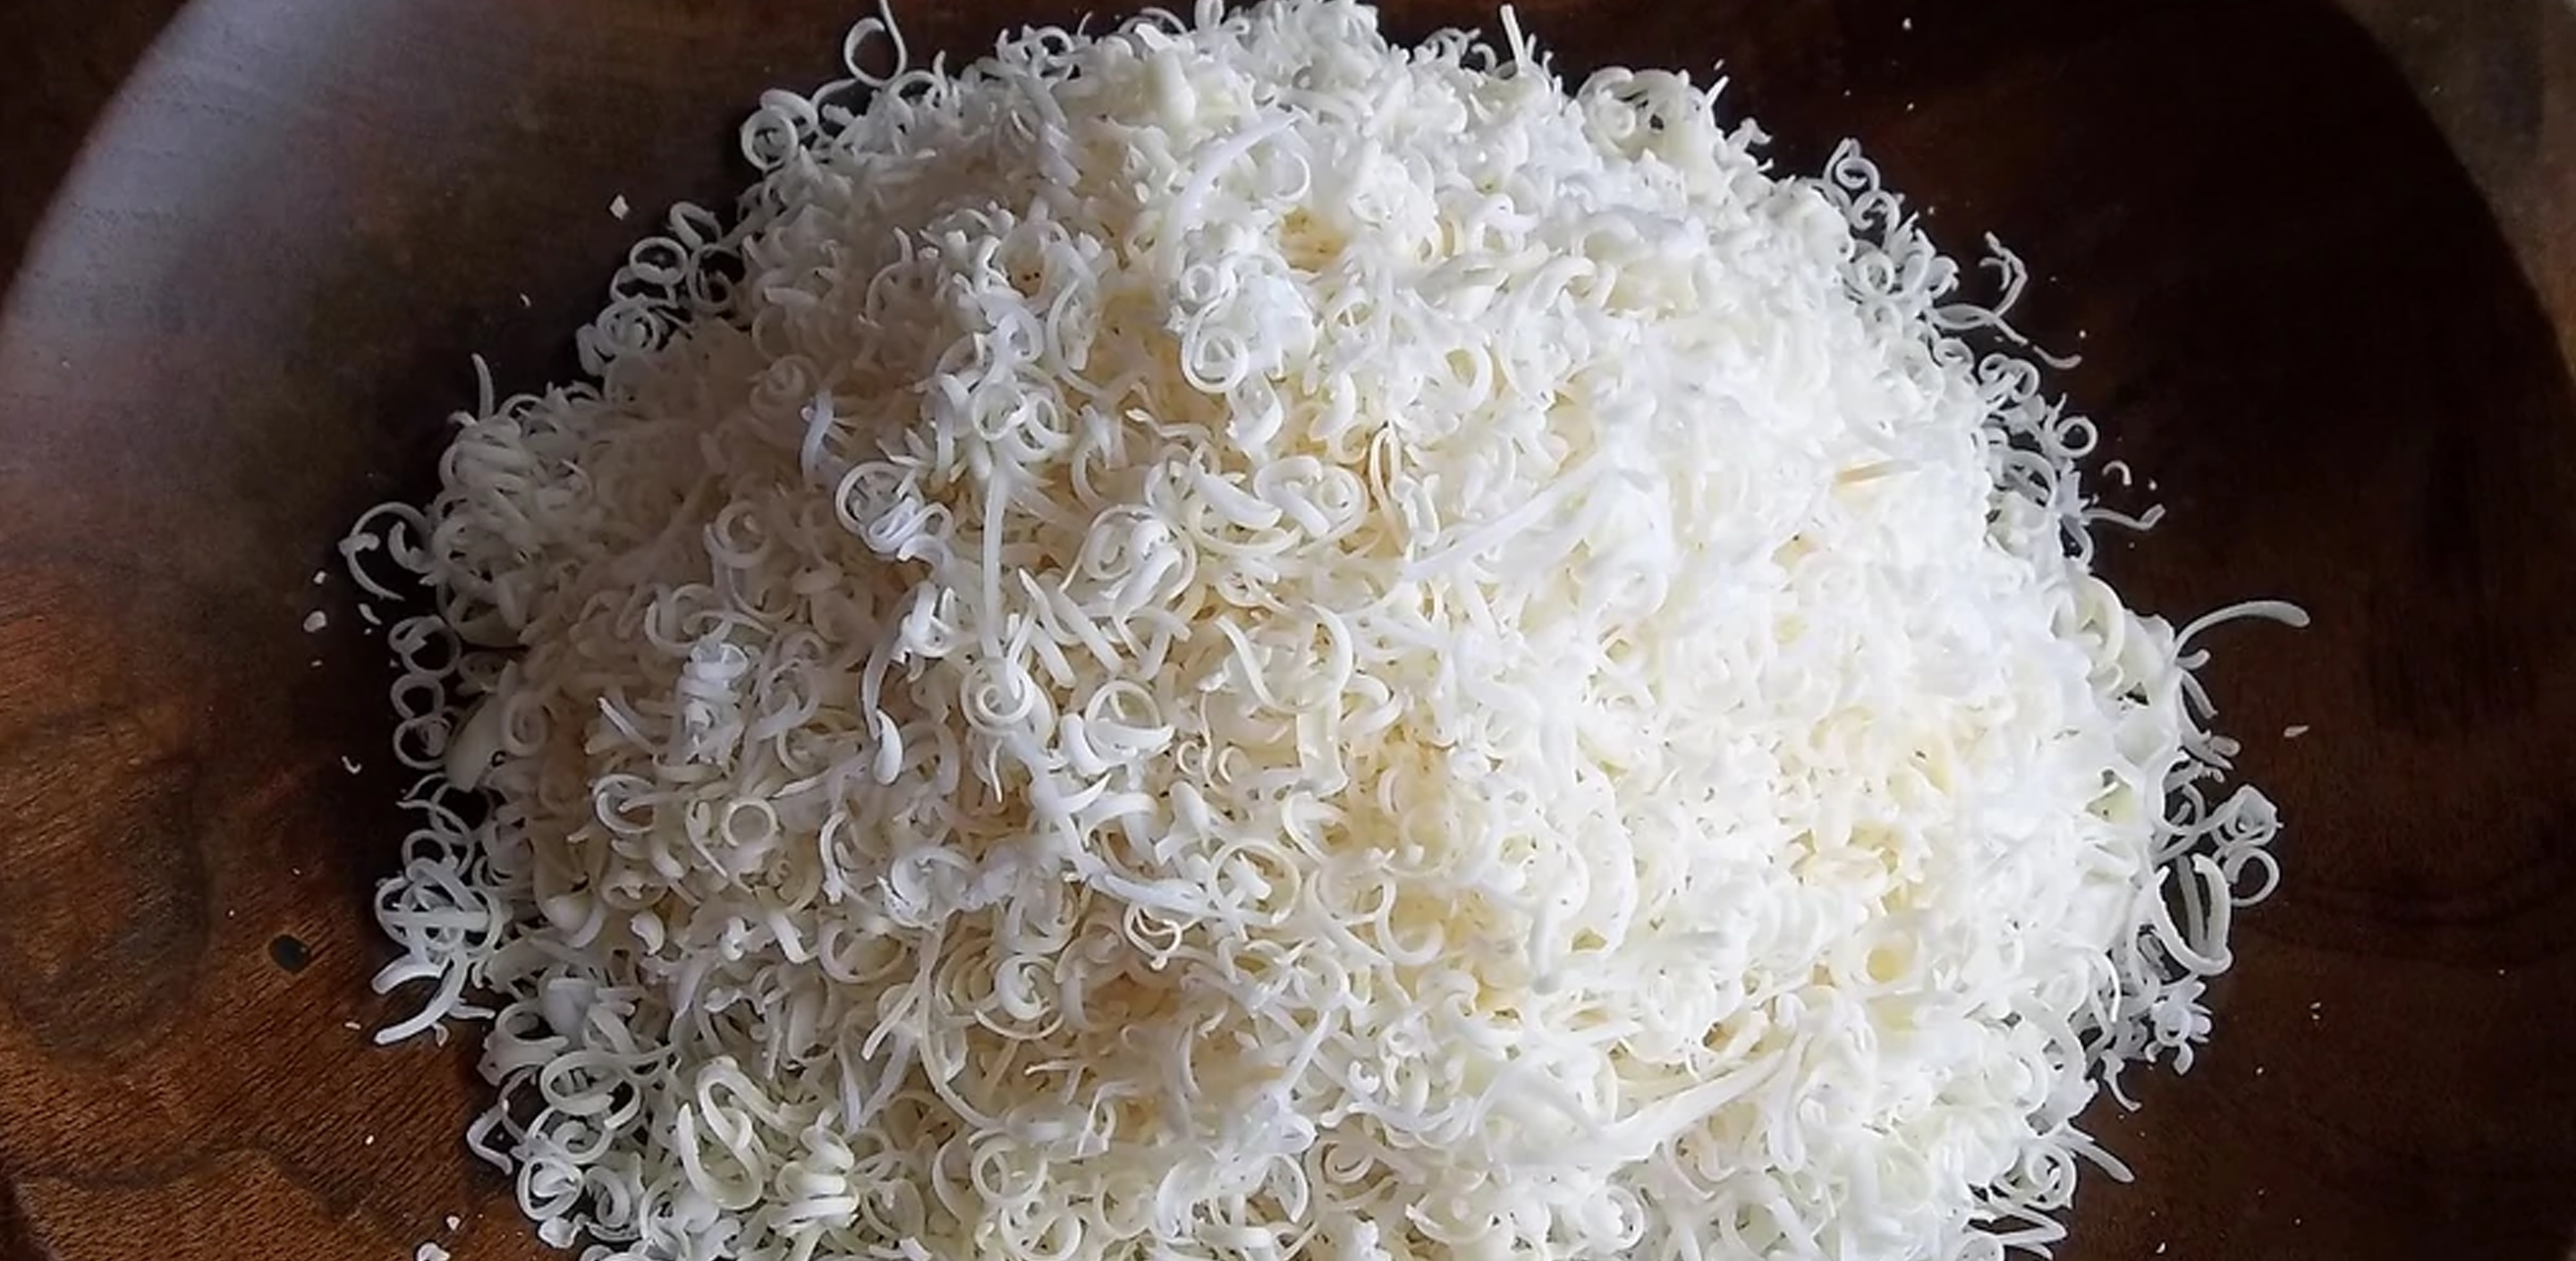 7 Awesome Ways to Use Soap Flakes (Besides Making Laundry Soap